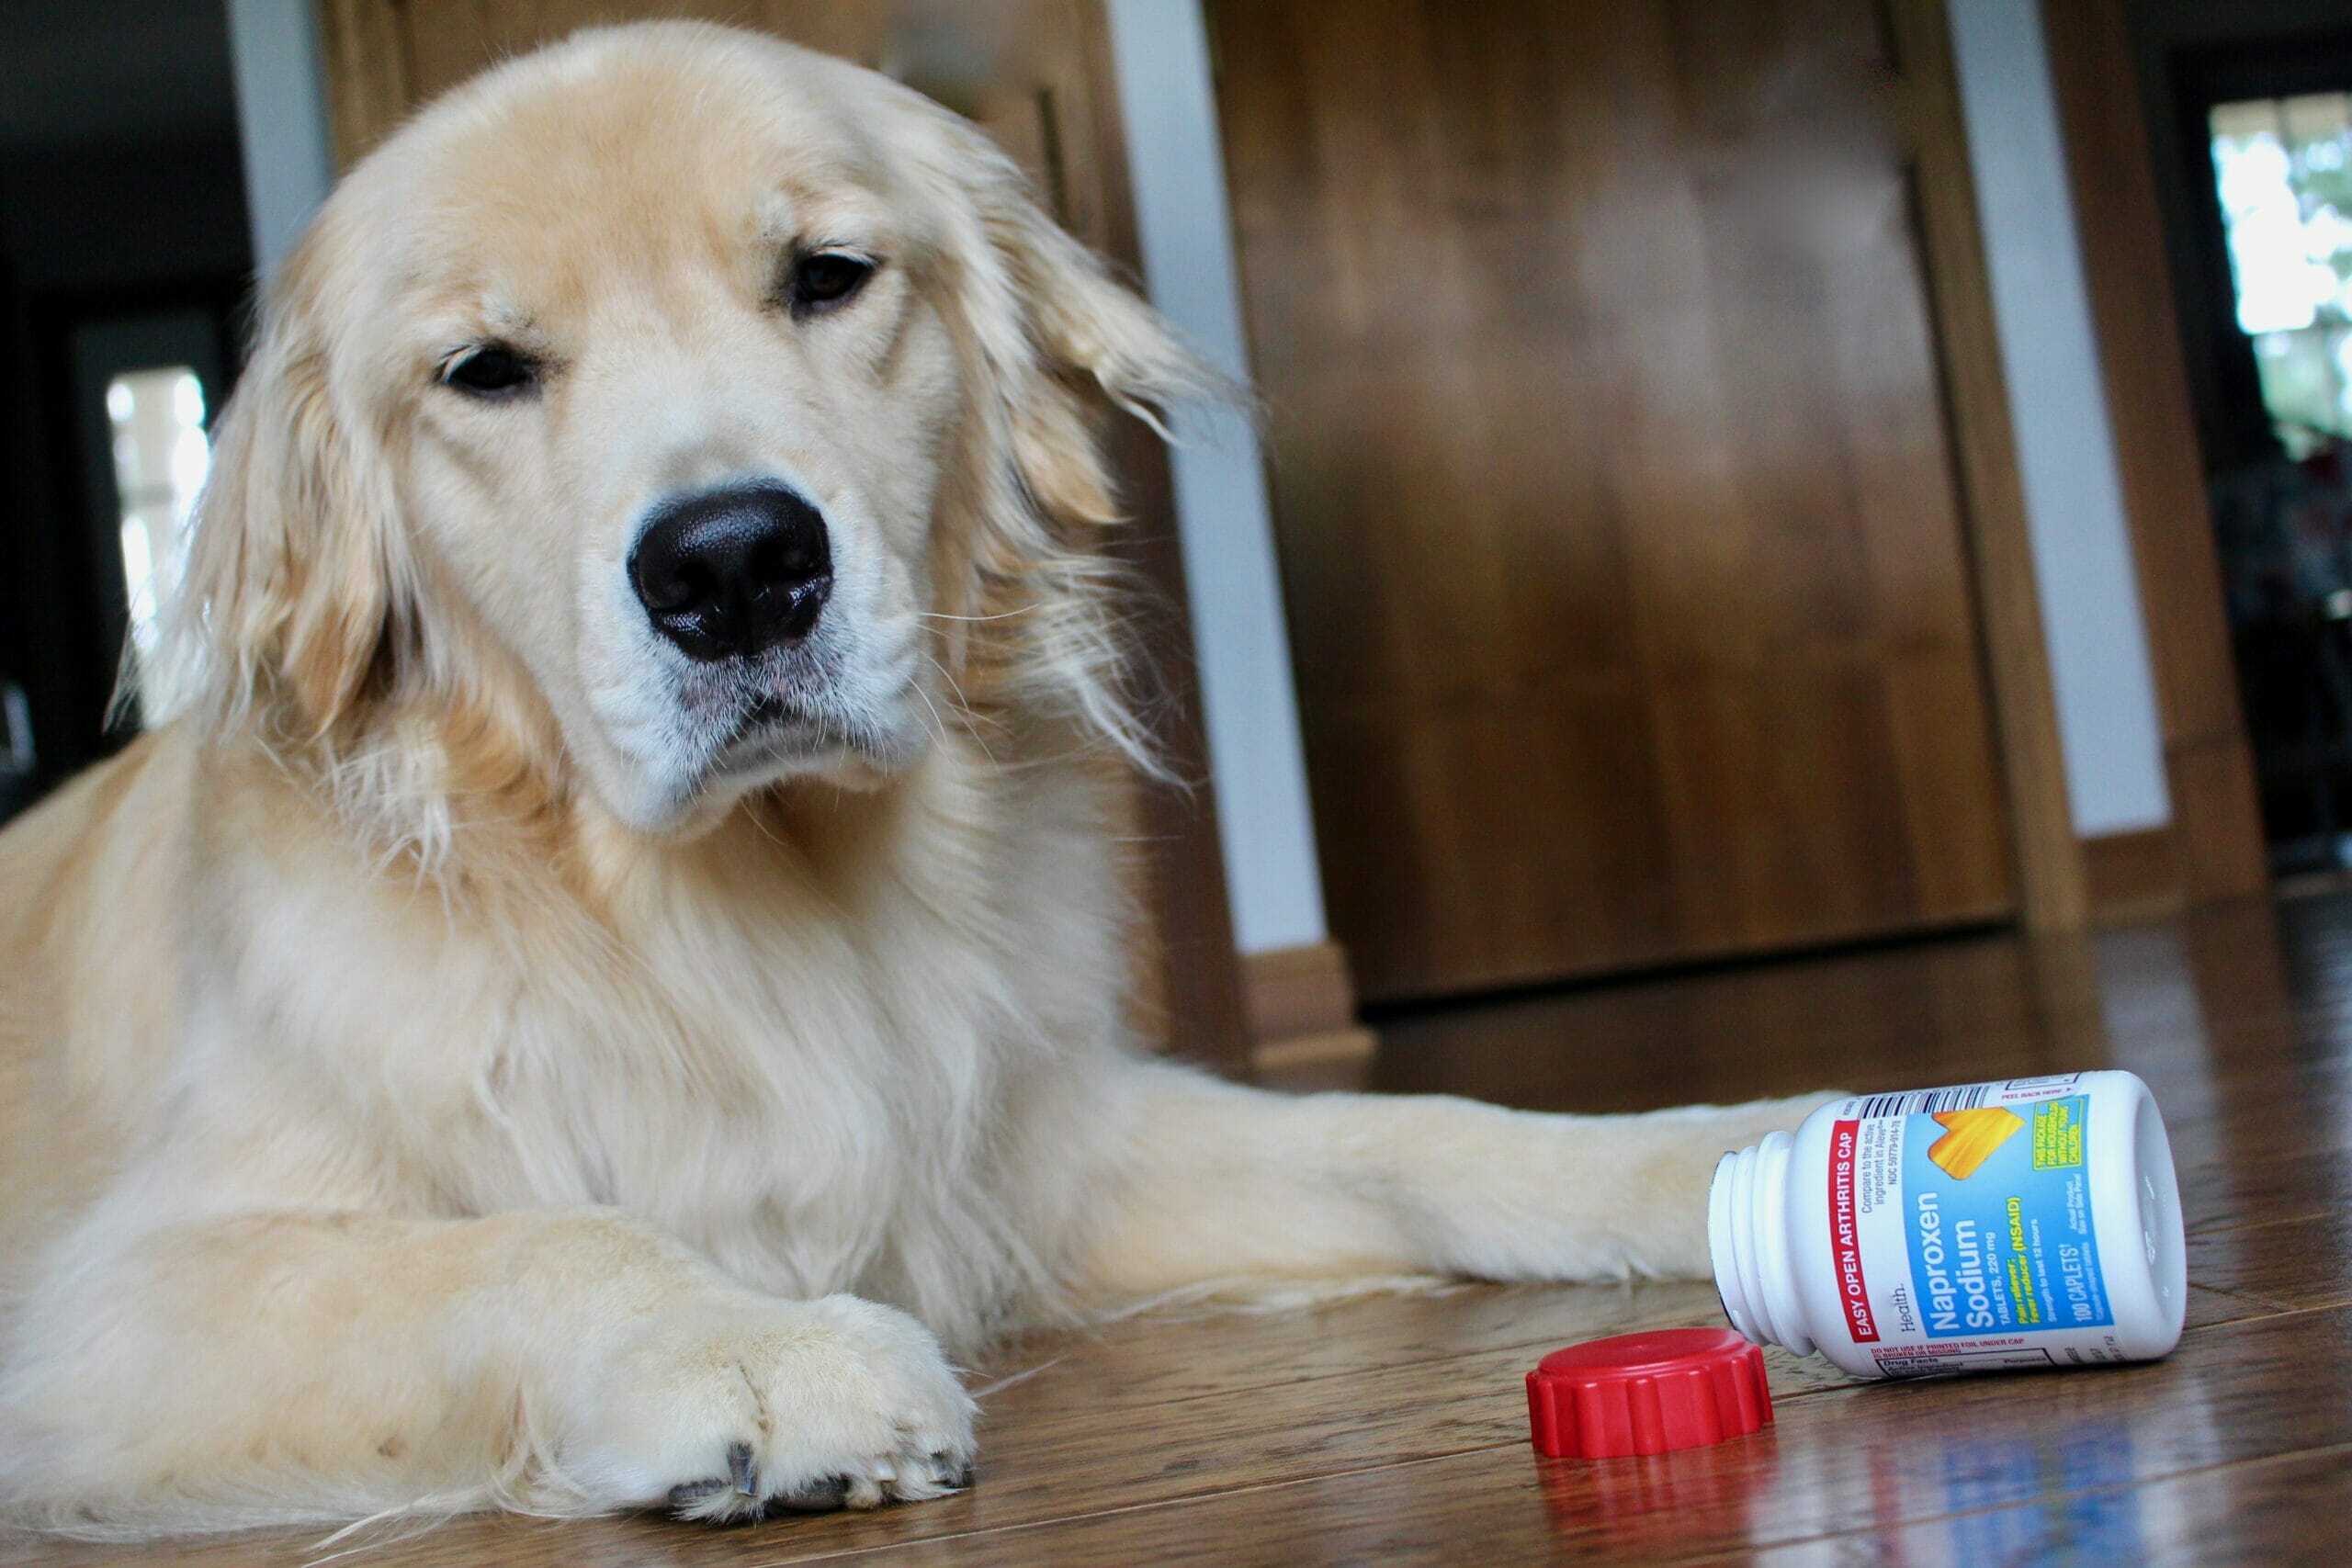 Is Ibuprofen Toxic For Dogs? - Medvet